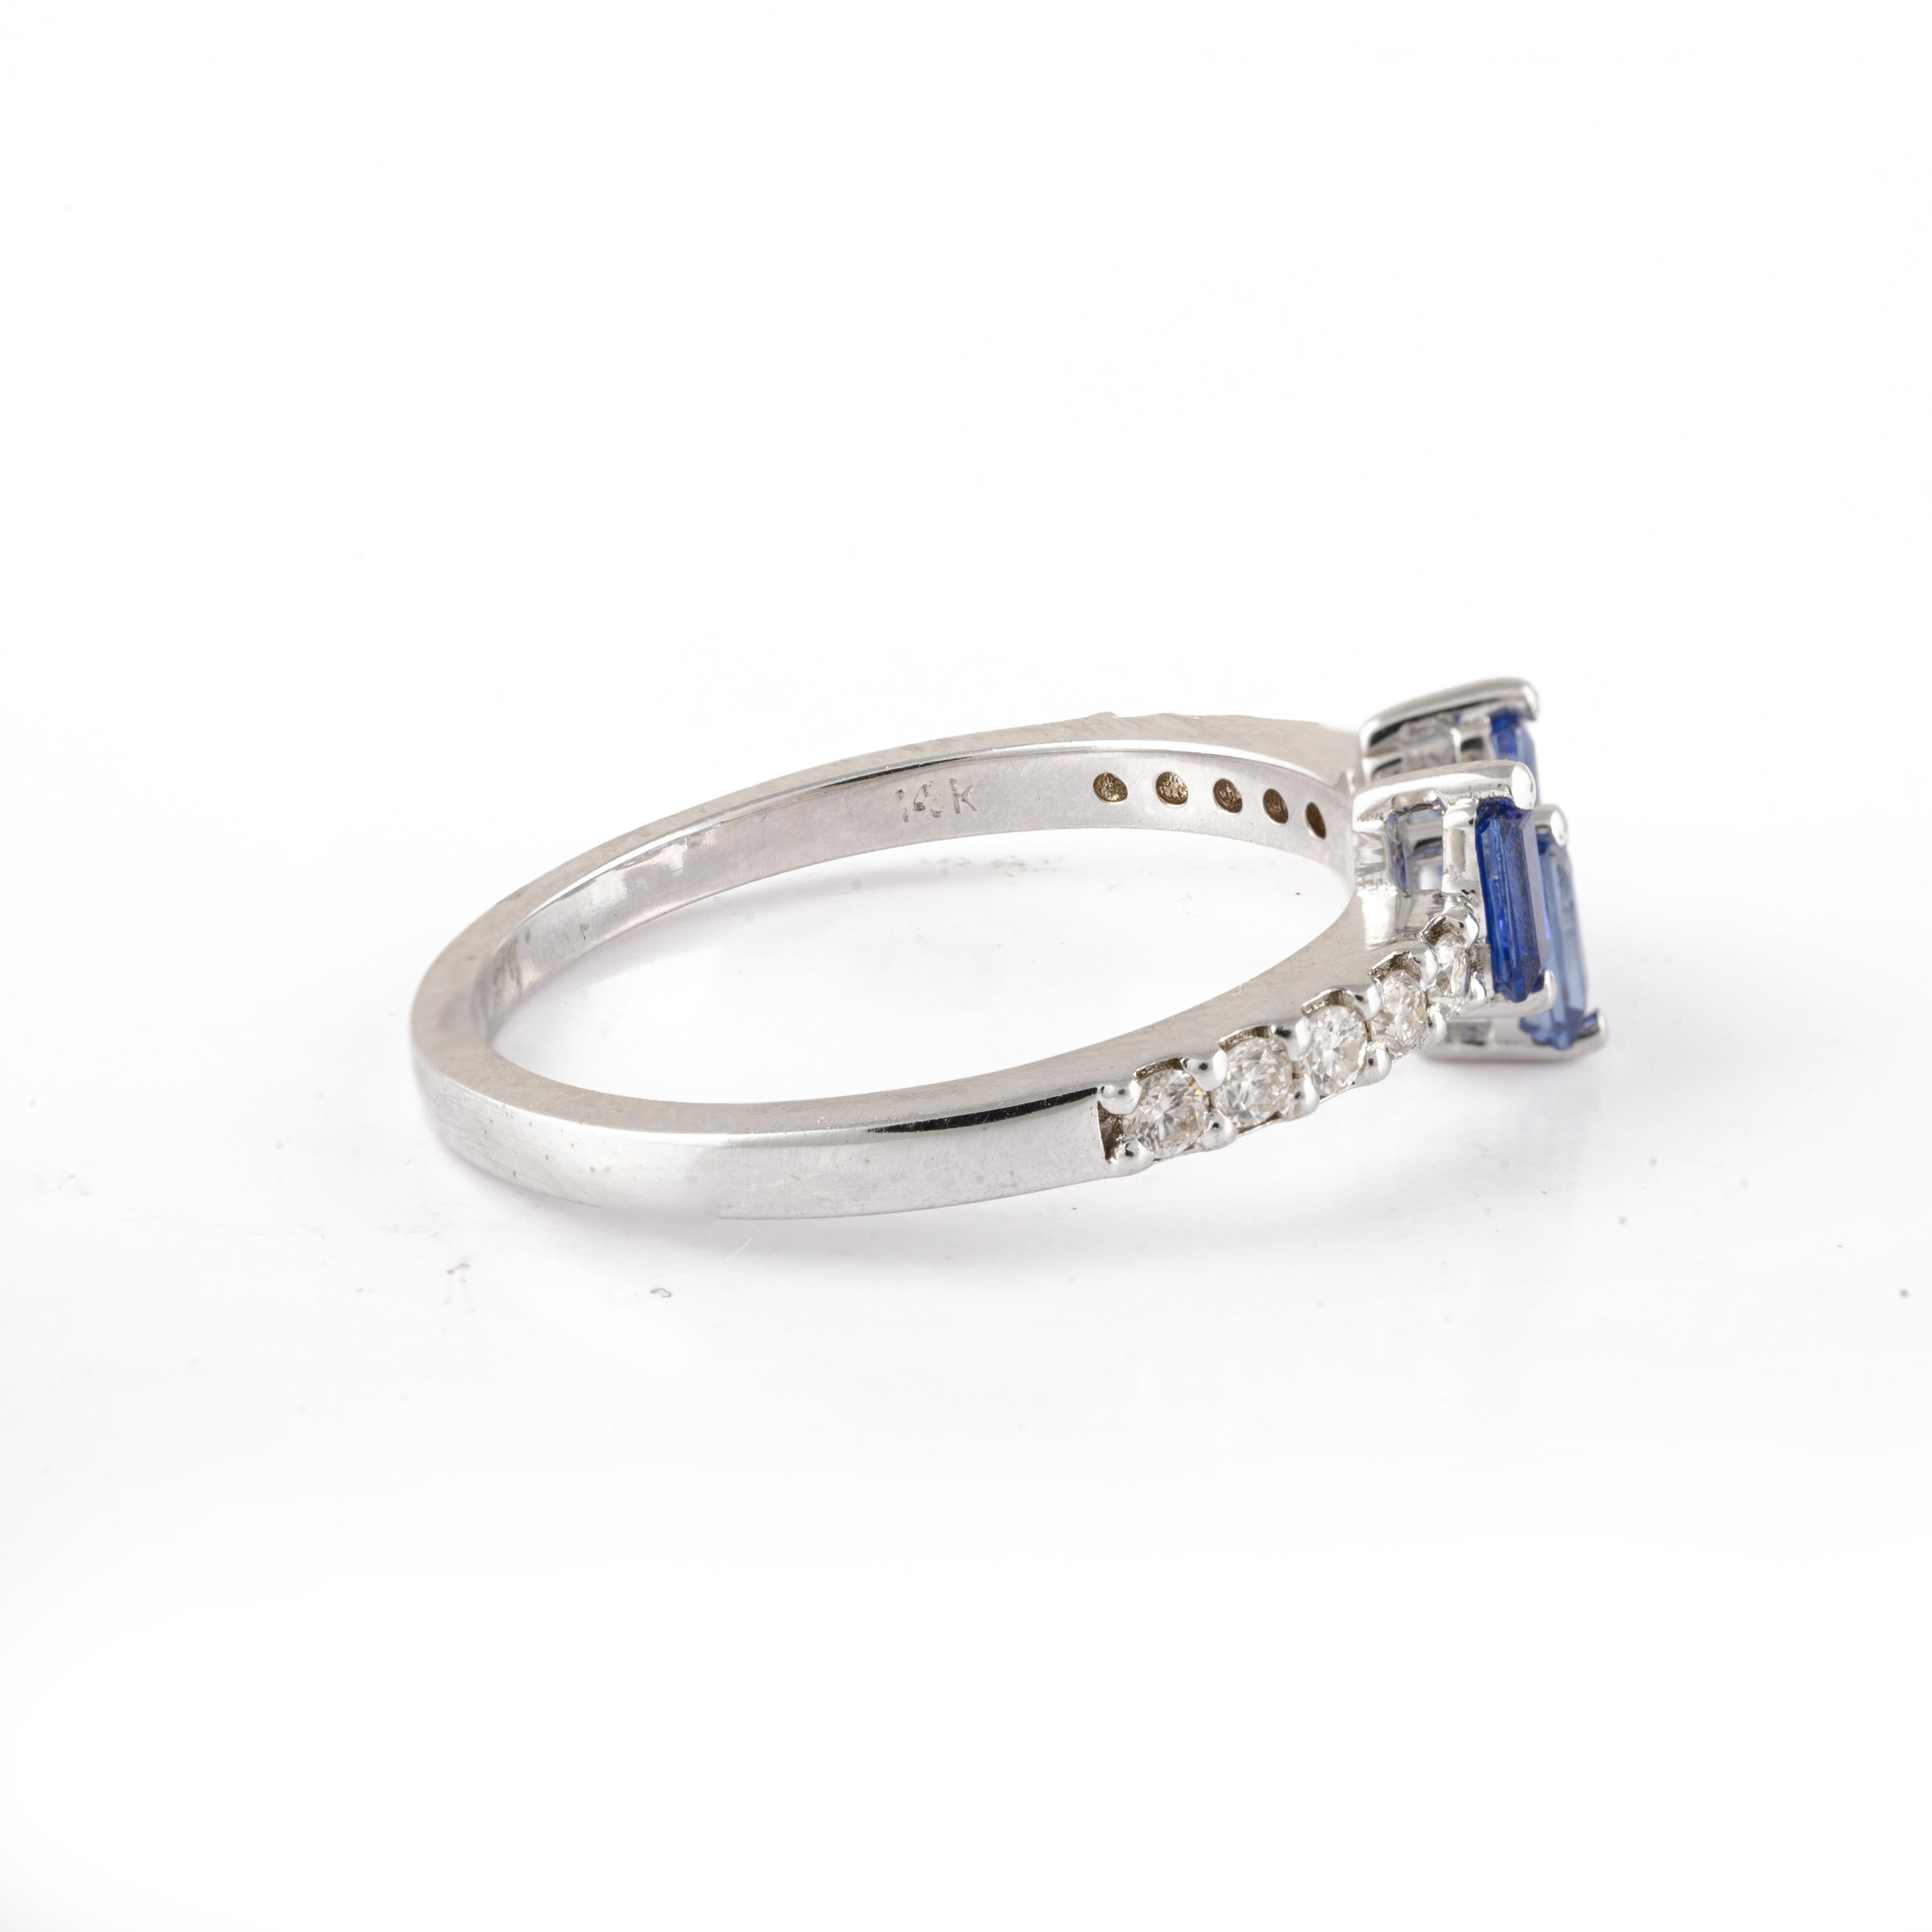 For Sale:  Minimalist Blue Sapphire Ring with Diamonds Crafted in 14kt Solid White Gold 4